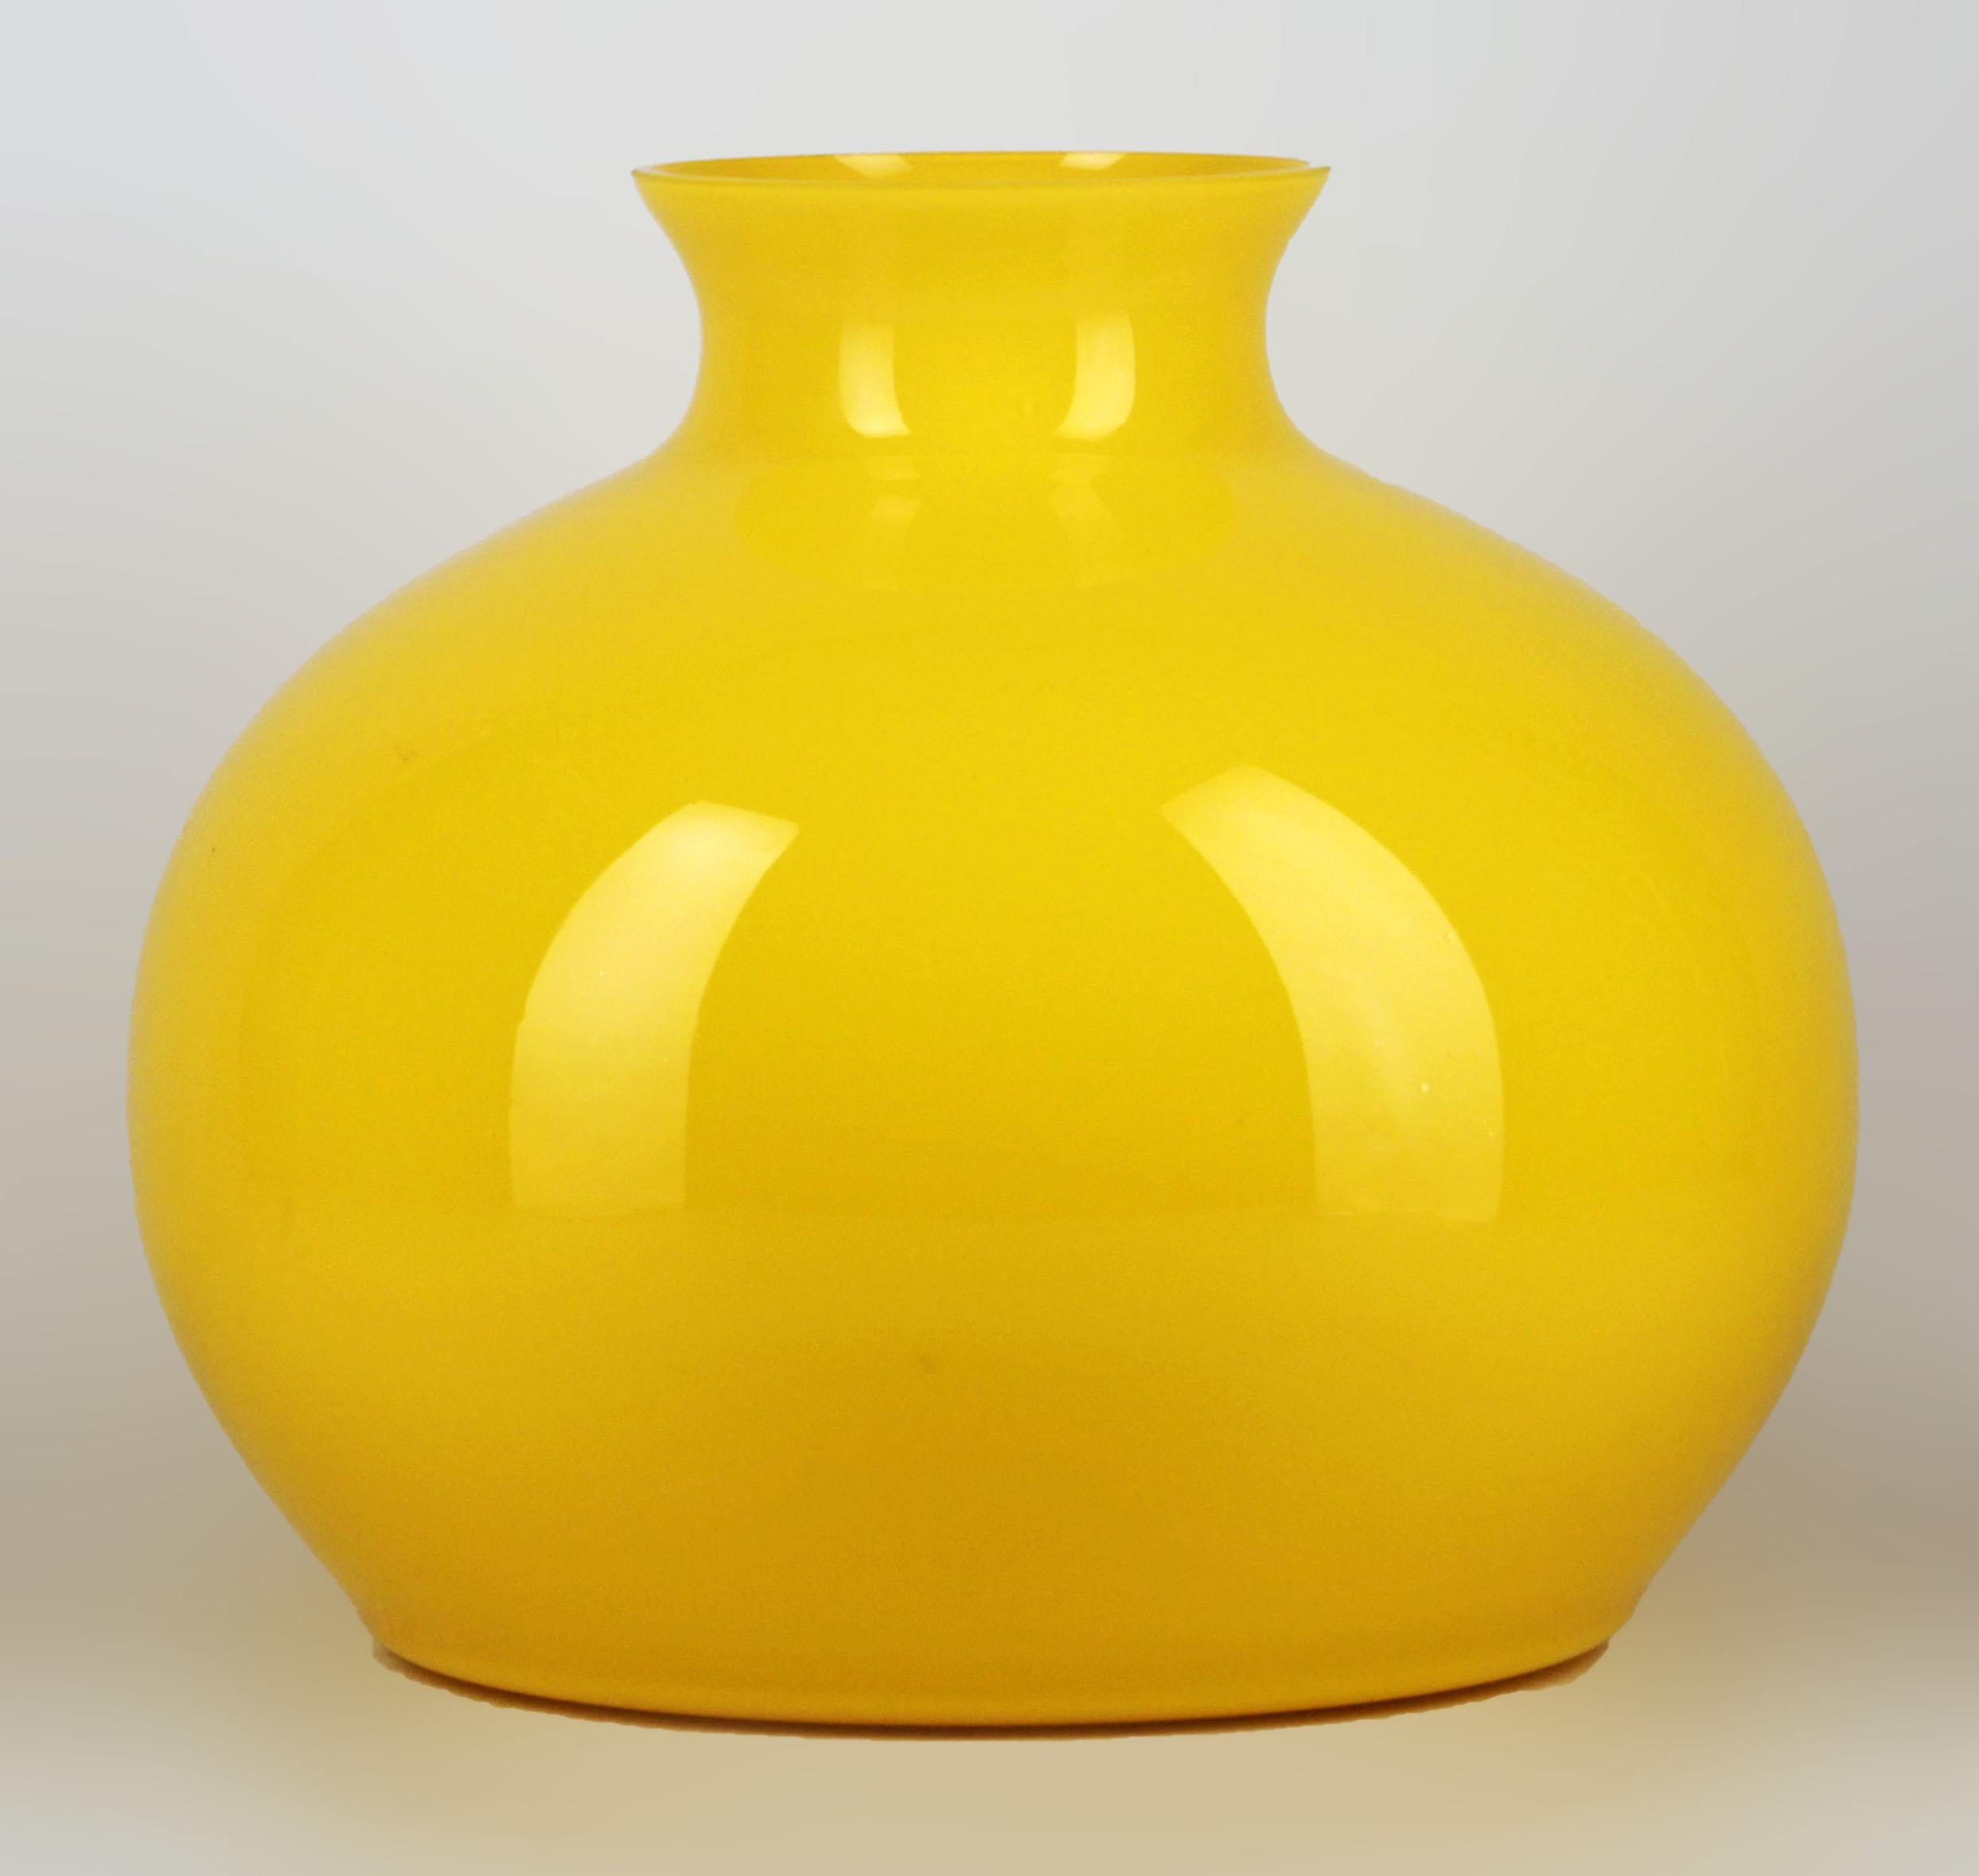 Late 20th century bulbous polished glass yellow vase of scandinavian design

By: unknown
Material: glass, enamel
Technique: cast, enameled, glazed, polished
Dimensions: 11 in x 10 in
Date: late 20th century, circa 1970
Style: Space Age, Scandinavian